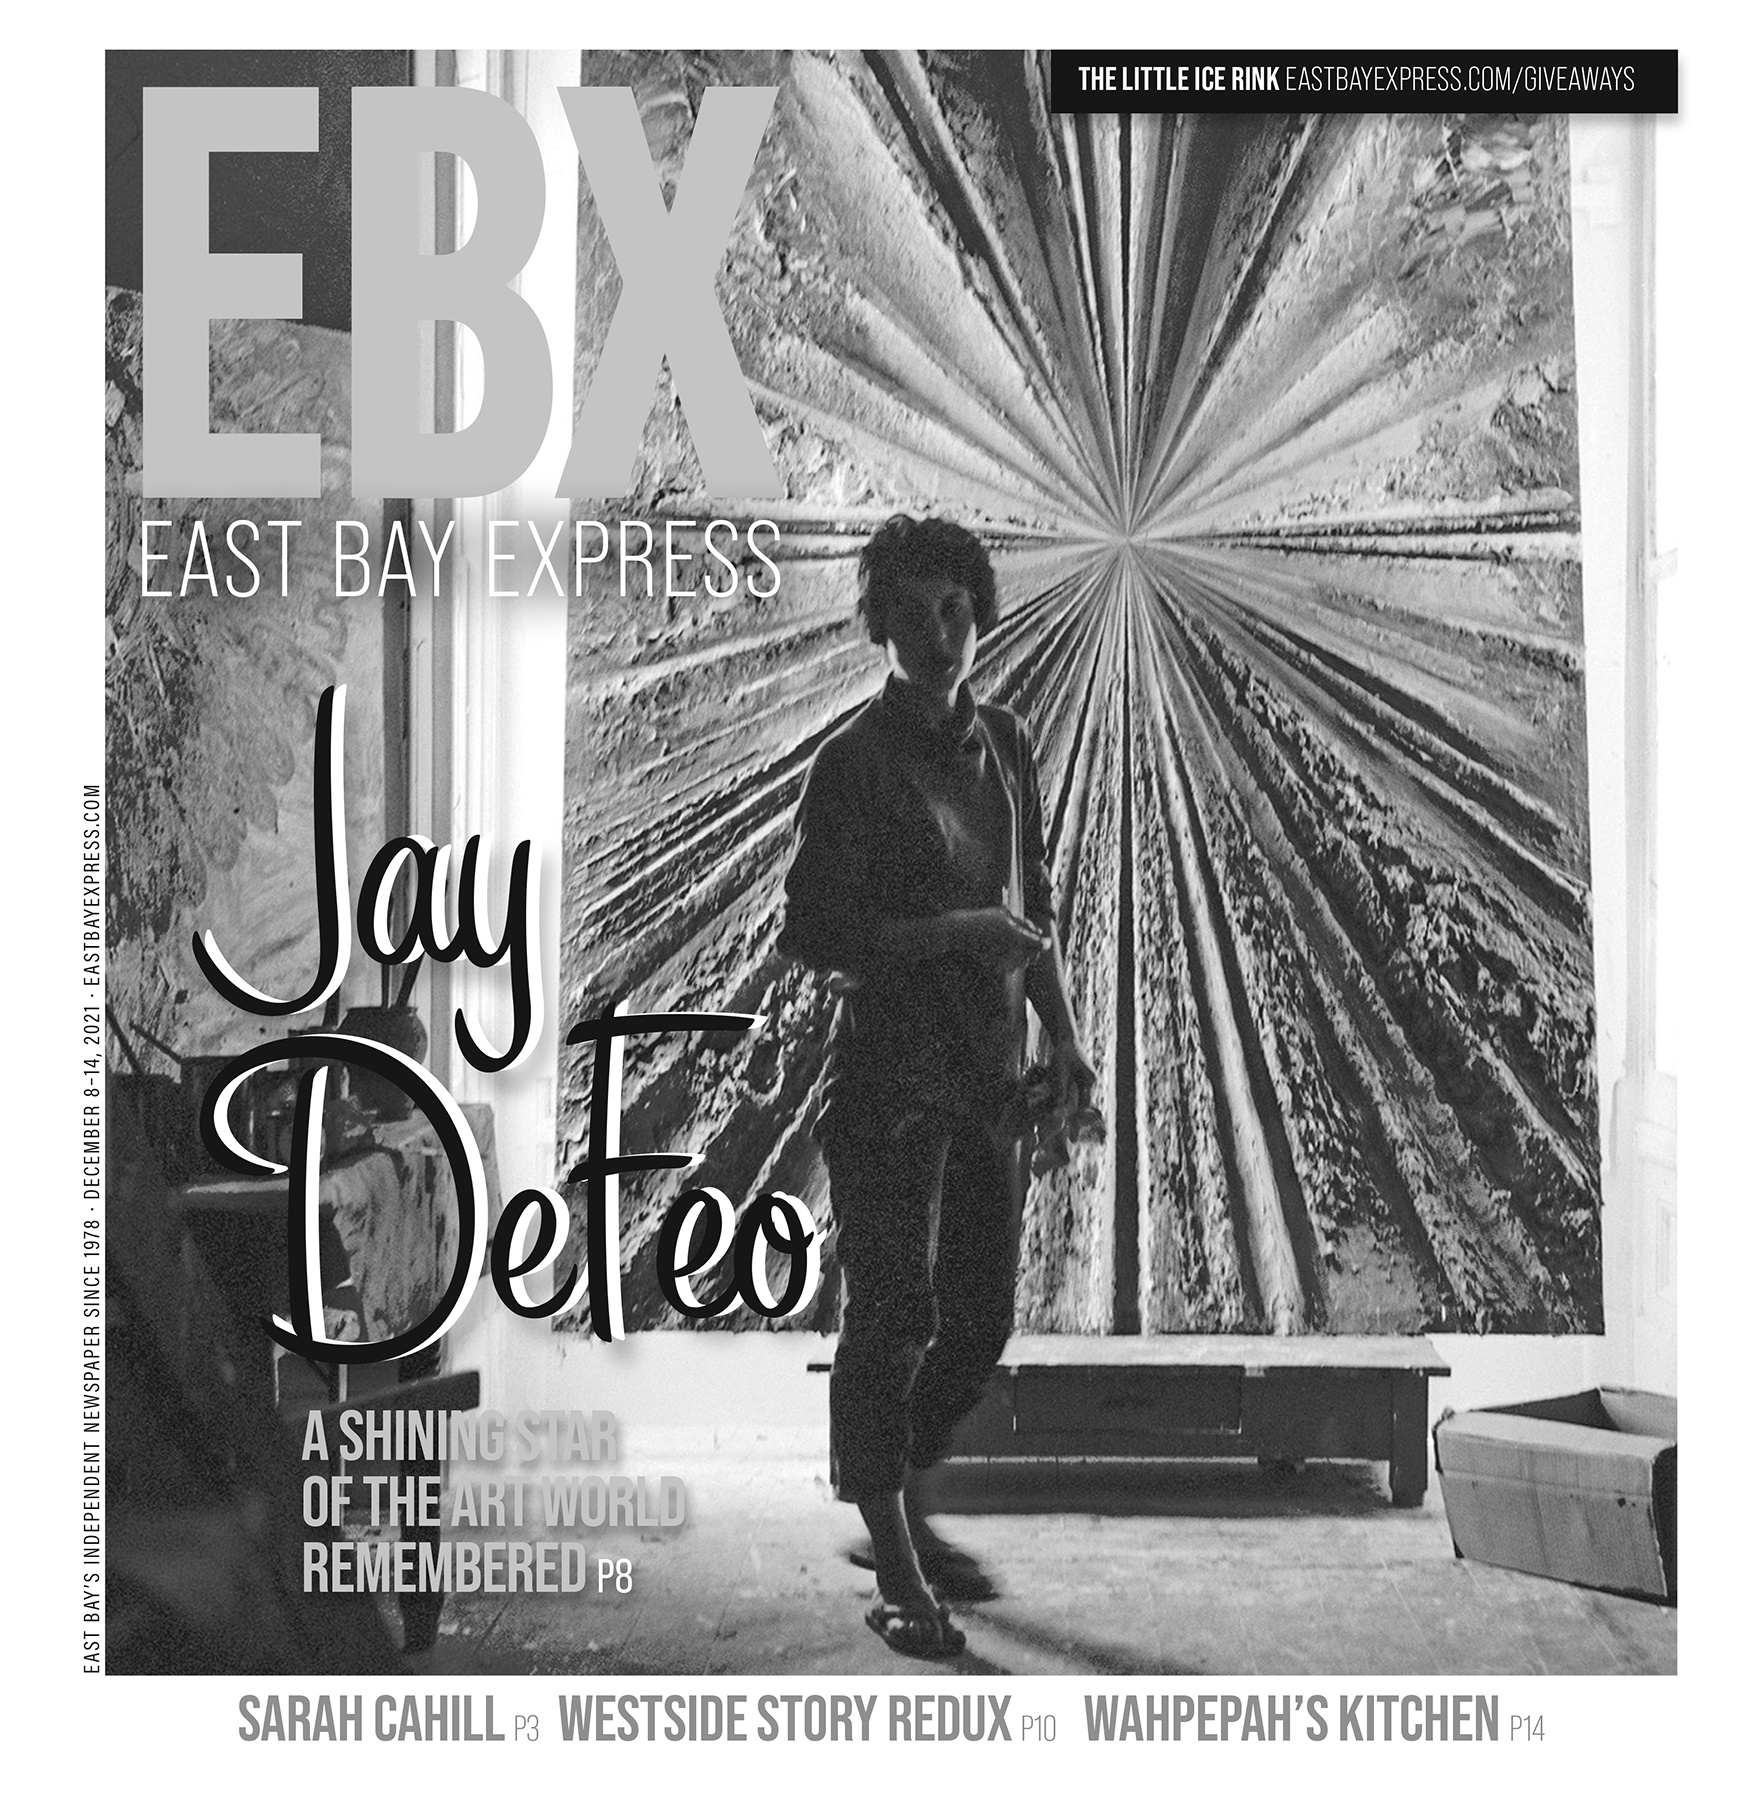 East Bay Express – ‘Rip Tails’: Jordan Stein’s latest book delves into the impacts of Jay DeFeo’s art